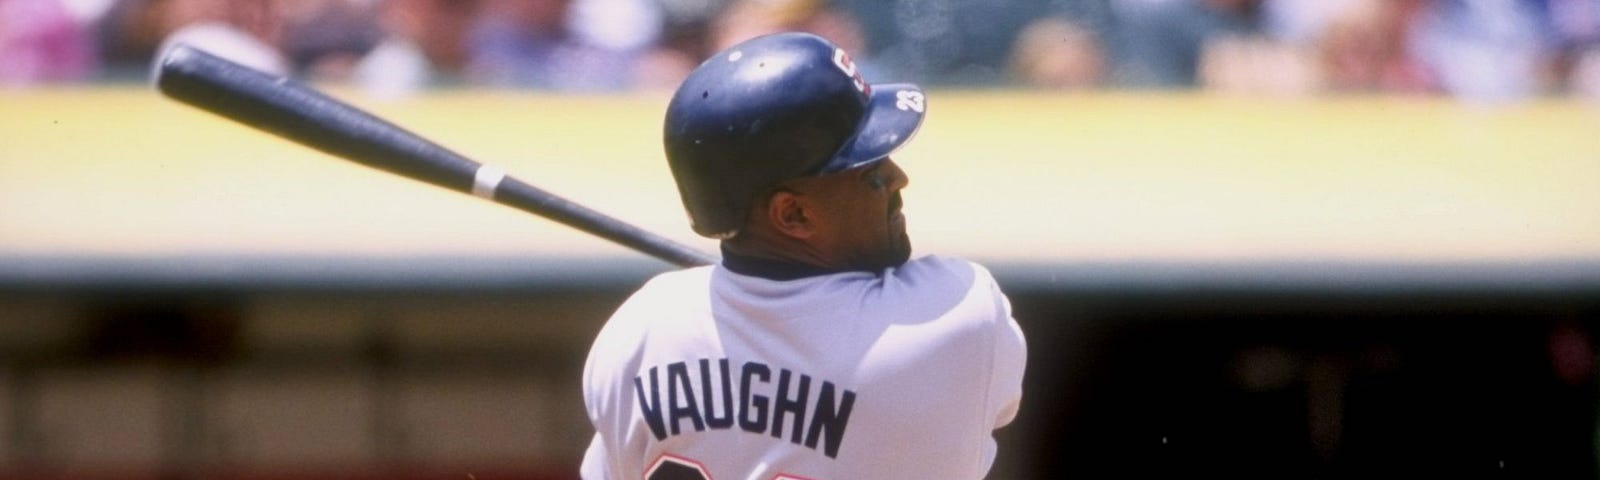 LF Greg Vaughn's big bat is at №5 in my All-time Padres lineup